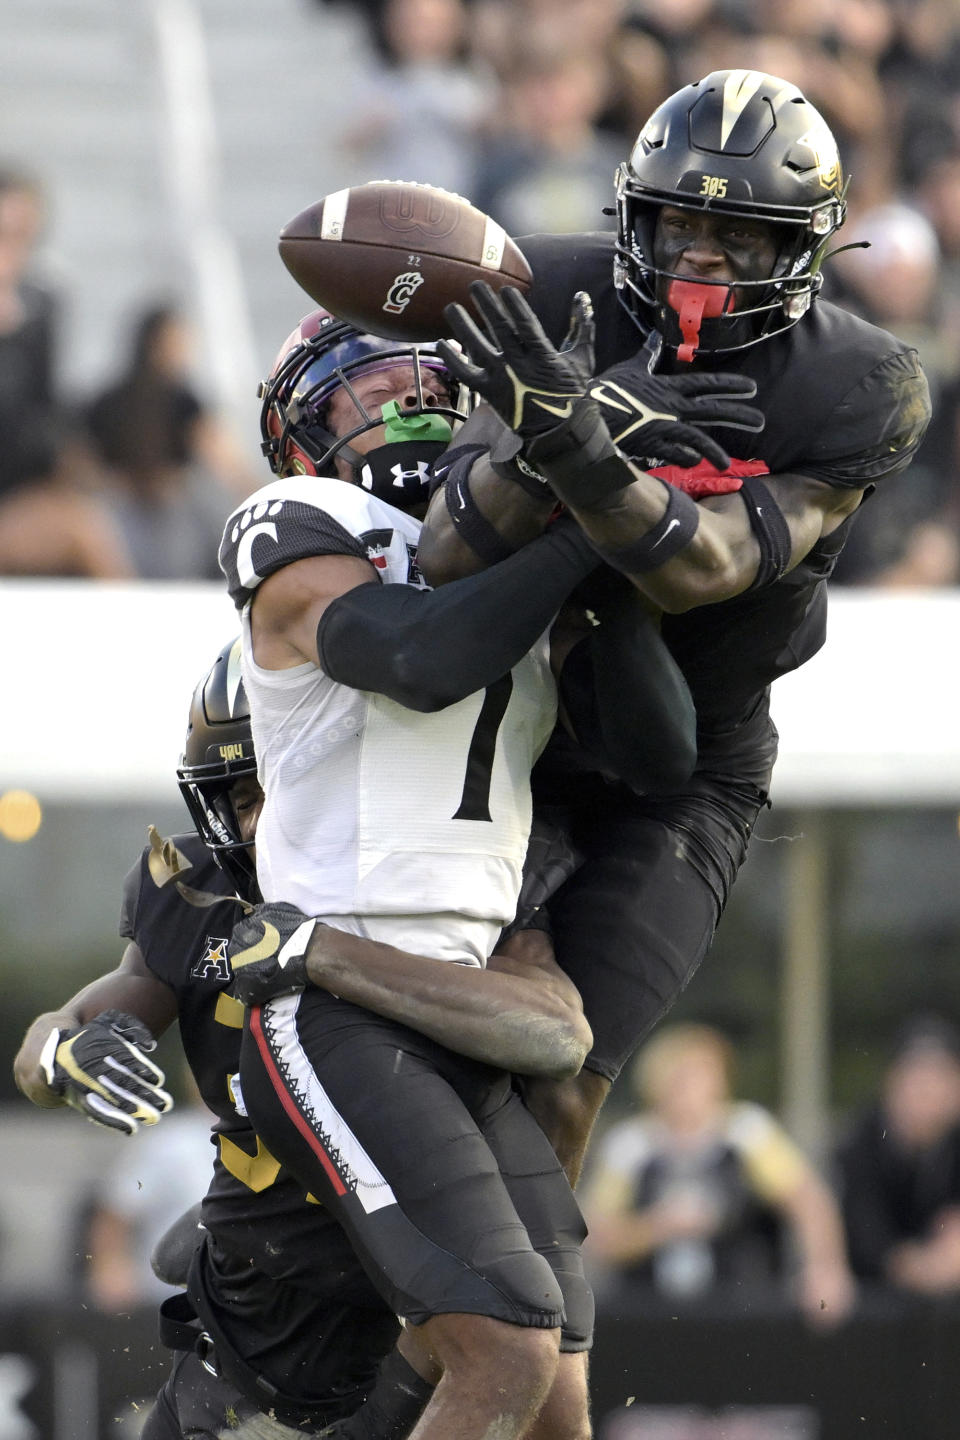 Central Florida cornerback Brandon Adams, left, and defensive back Divaad Wilson, right, break up a pass intended for Cincinnati wide receiver Tre Tucker (1) during the second half of an NCAA college football game, Saturday, Oct. 29, 2022, in Orlando, Fla. (AP Photo/Phelan M. Ebenhack)